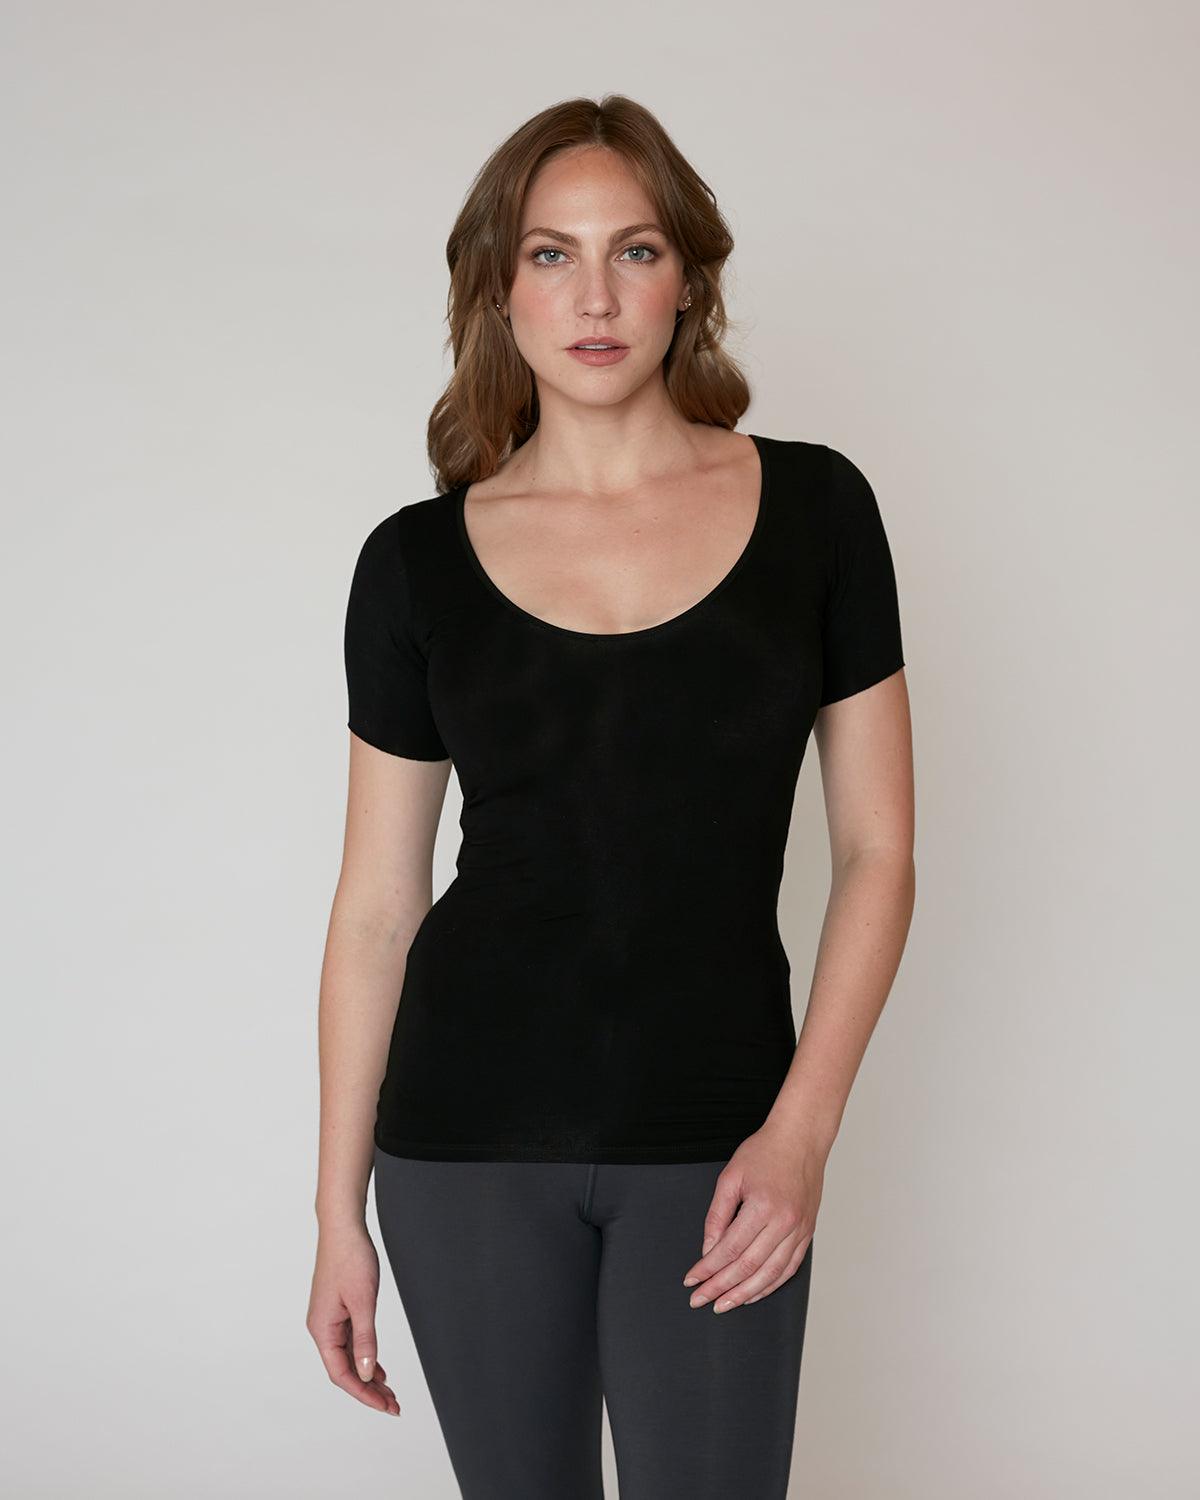 "#color_black| Siobhan is 5'8.5" and wears a size S